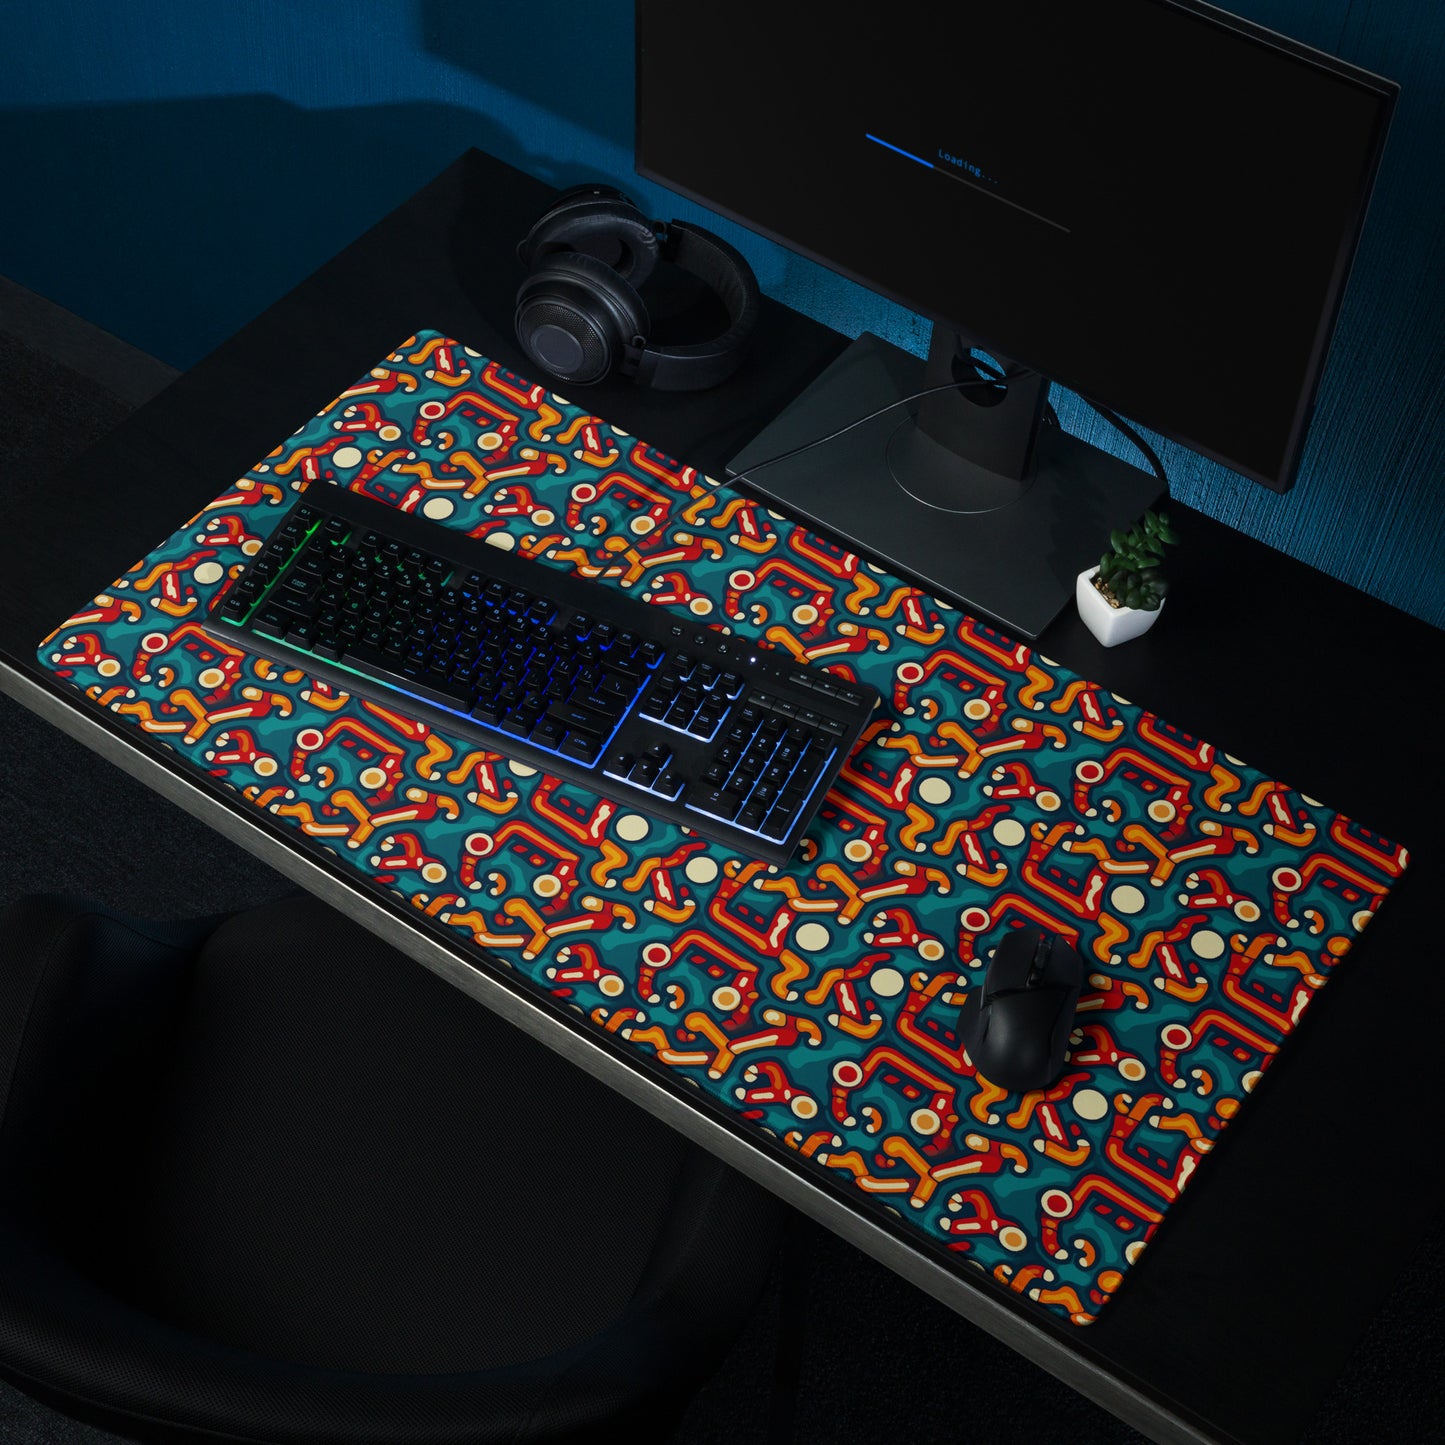 A 36" x 18" desk pad with abstract line art on it shown on a desk setup. Red, Orange and Teal in color.